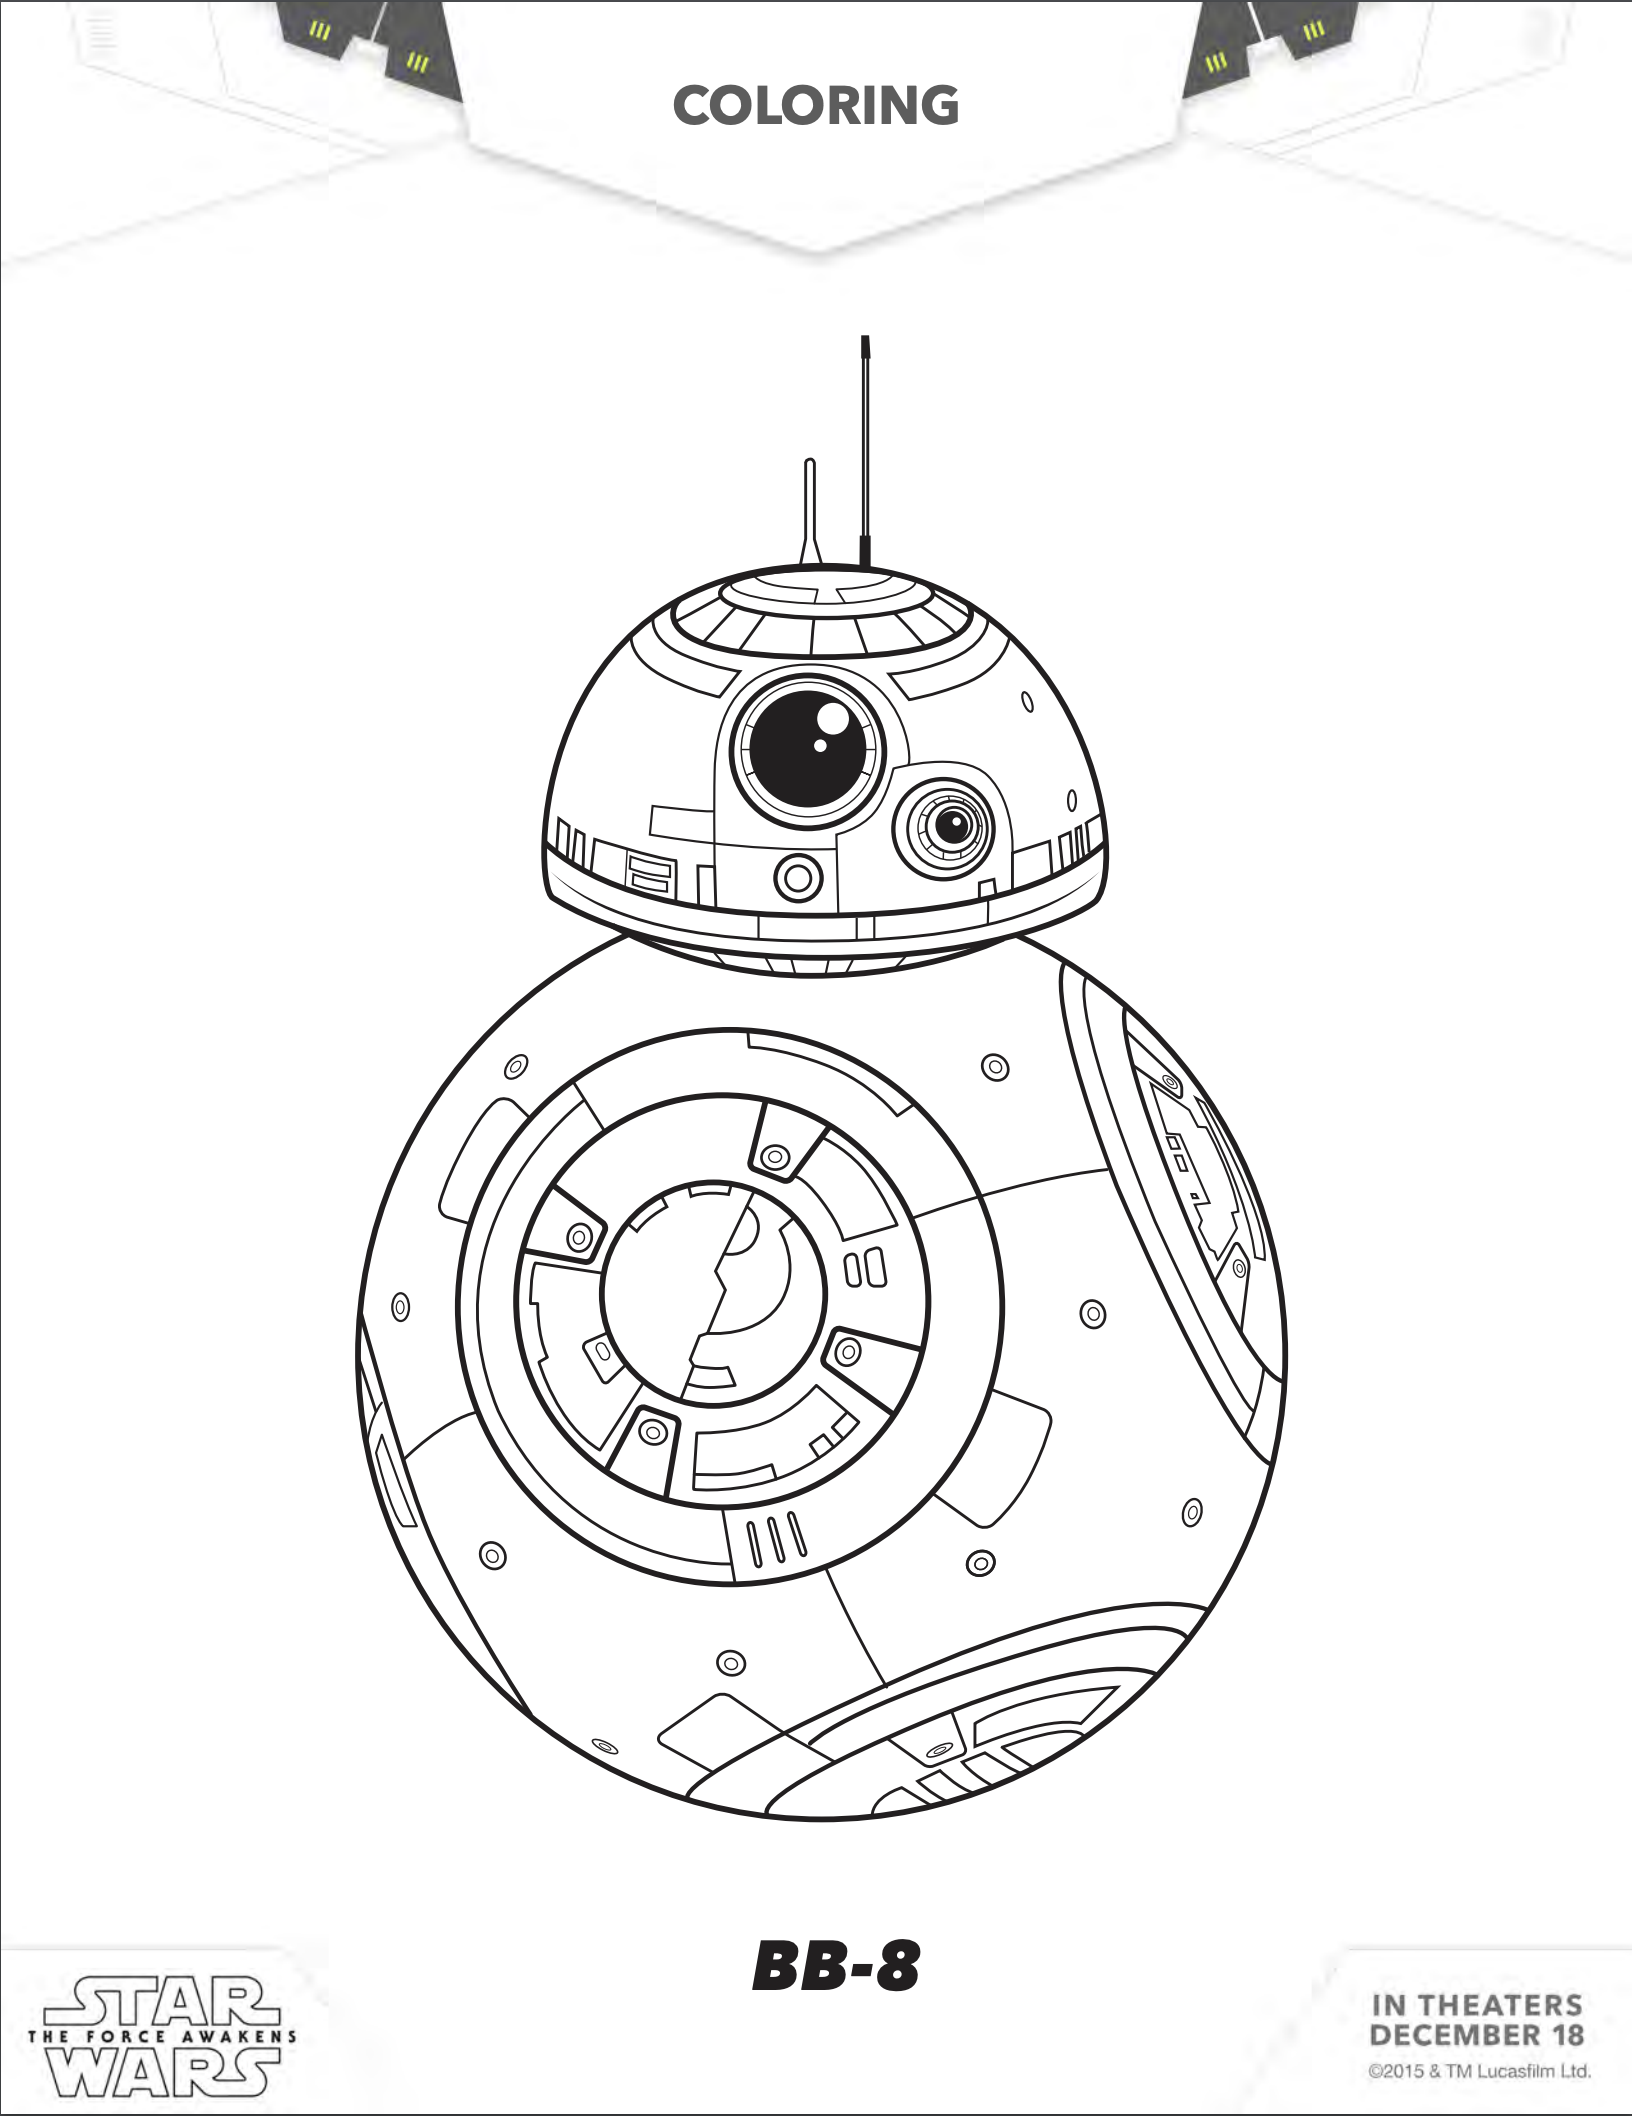 Star Wars Printables   FREE Coloring Pages   April Golightly